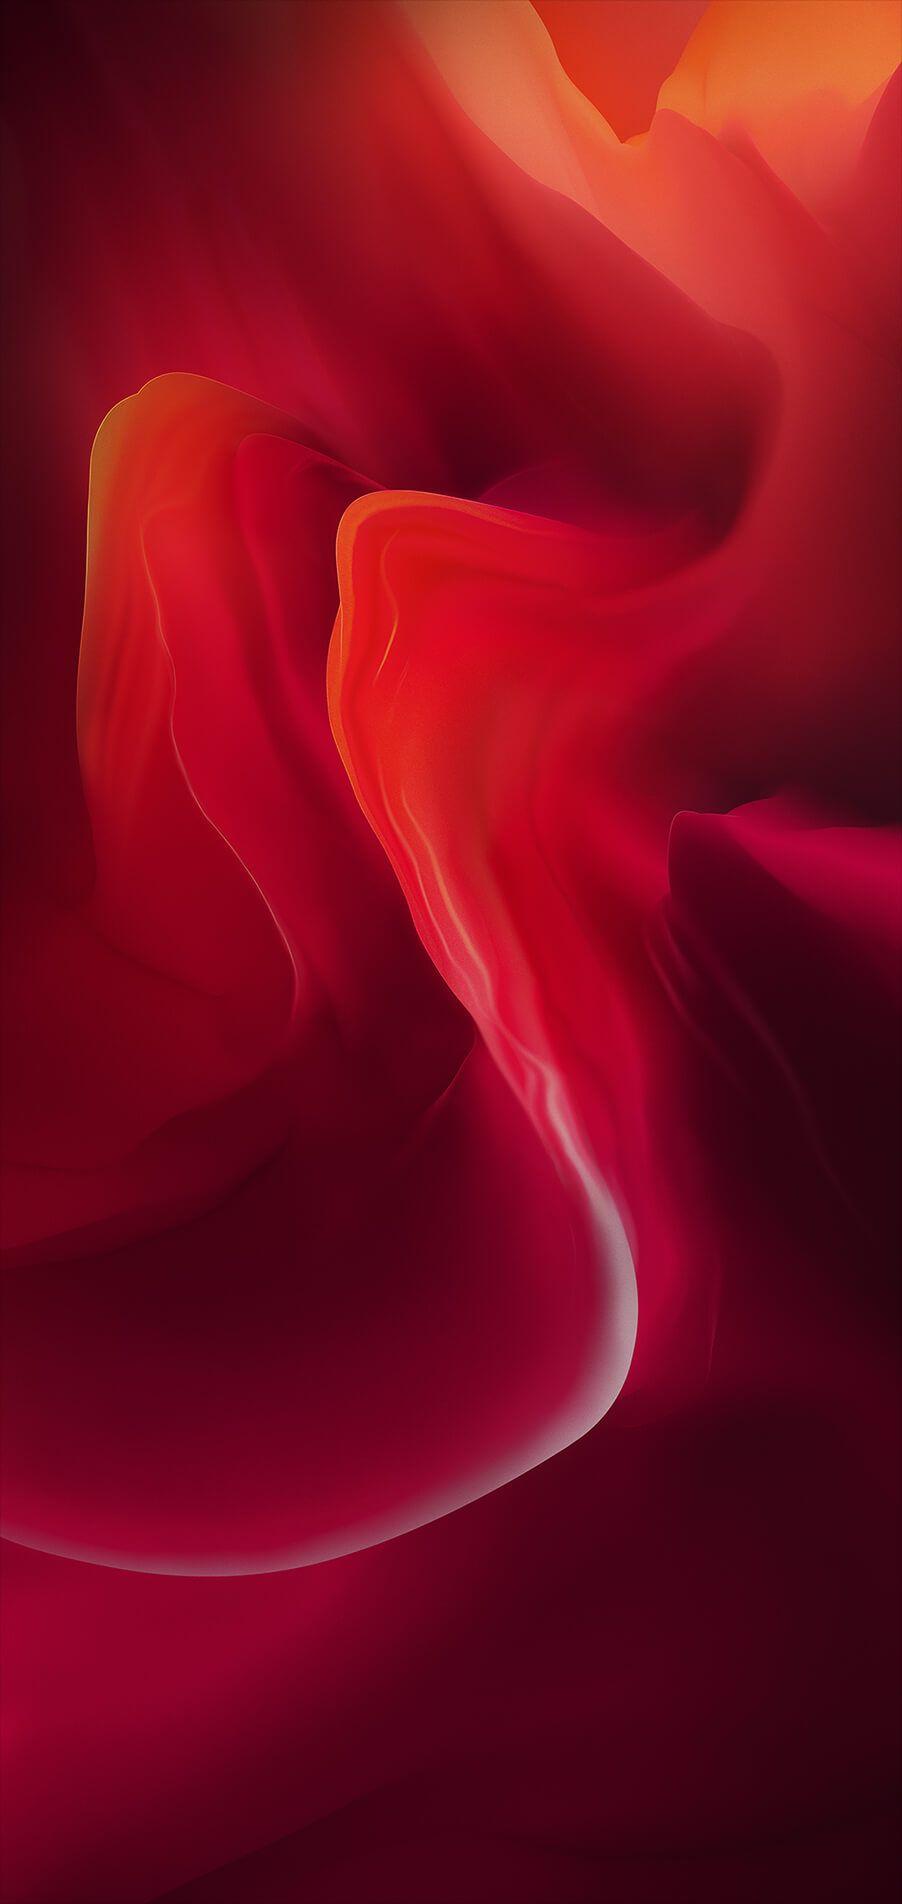 OnePlus 6 Wallpaper. Love To Wall. Oneplus wallpaper, Cellphone